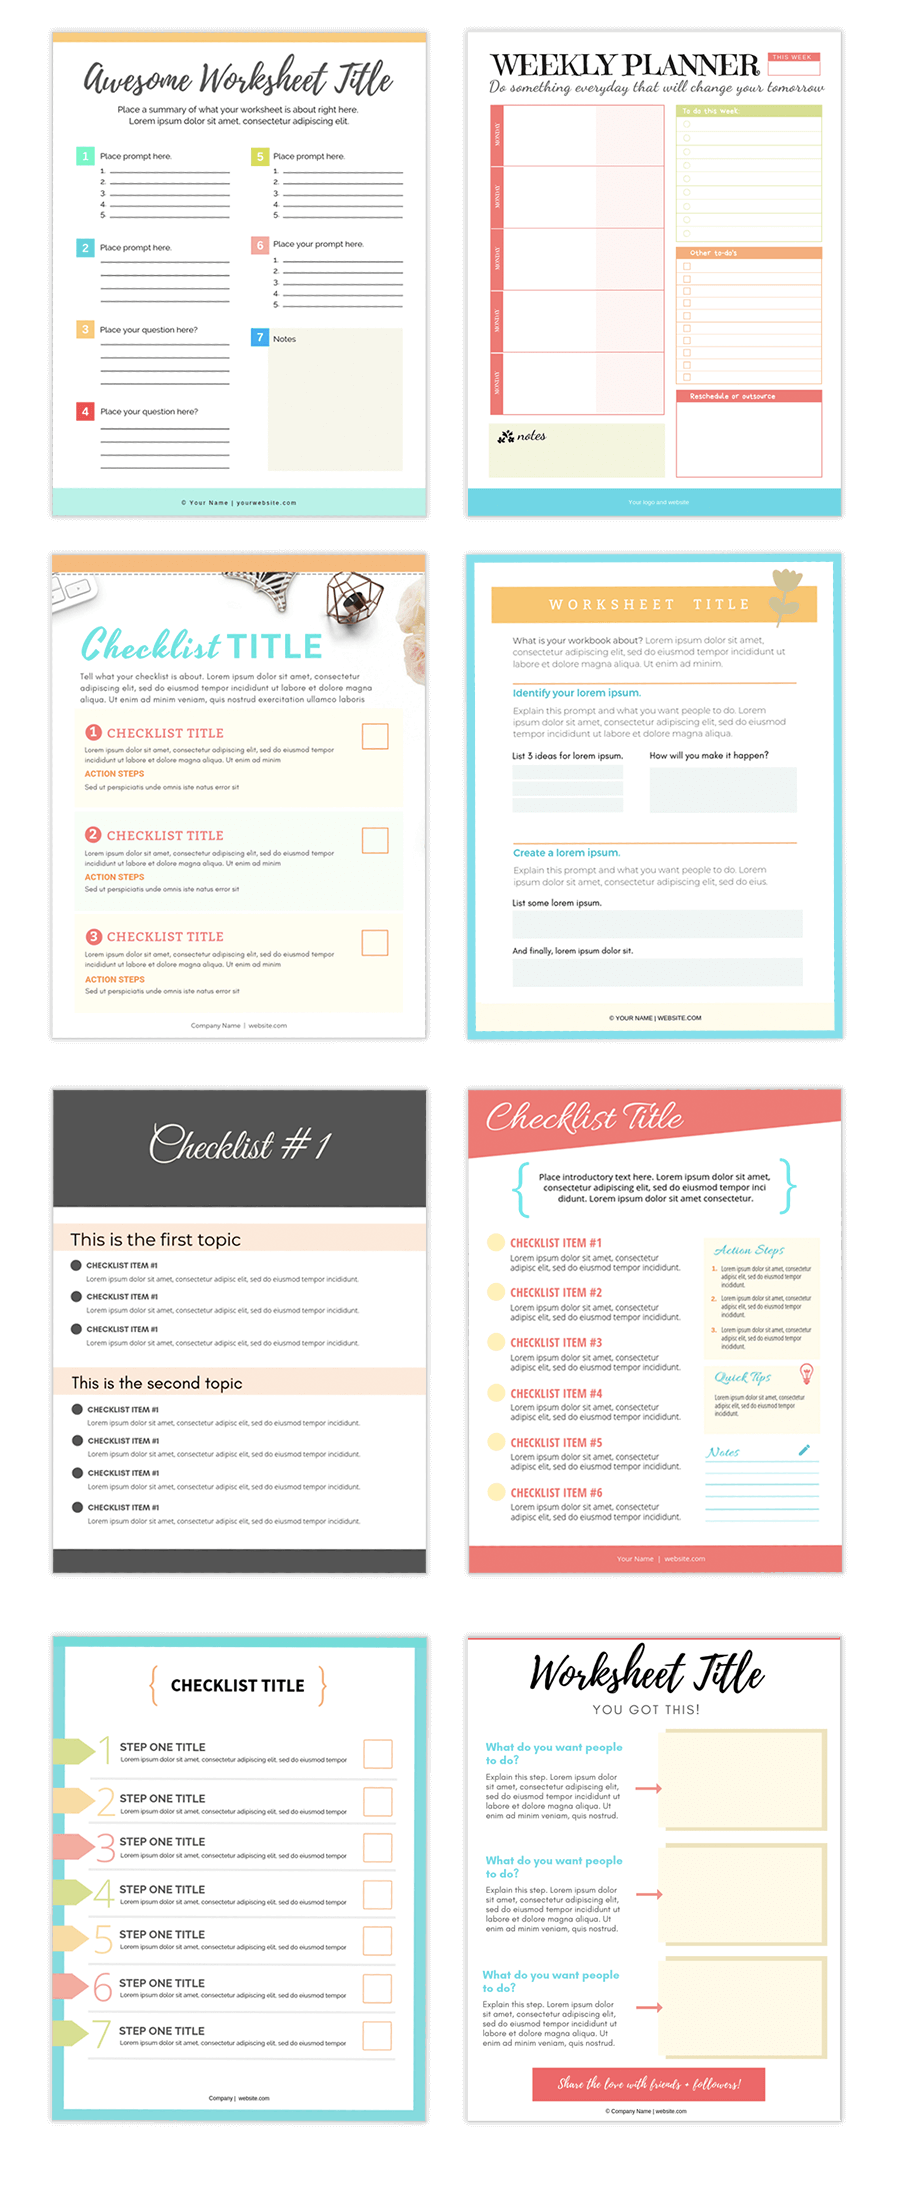 Worksheet and Checklist templates by ConversionMinded